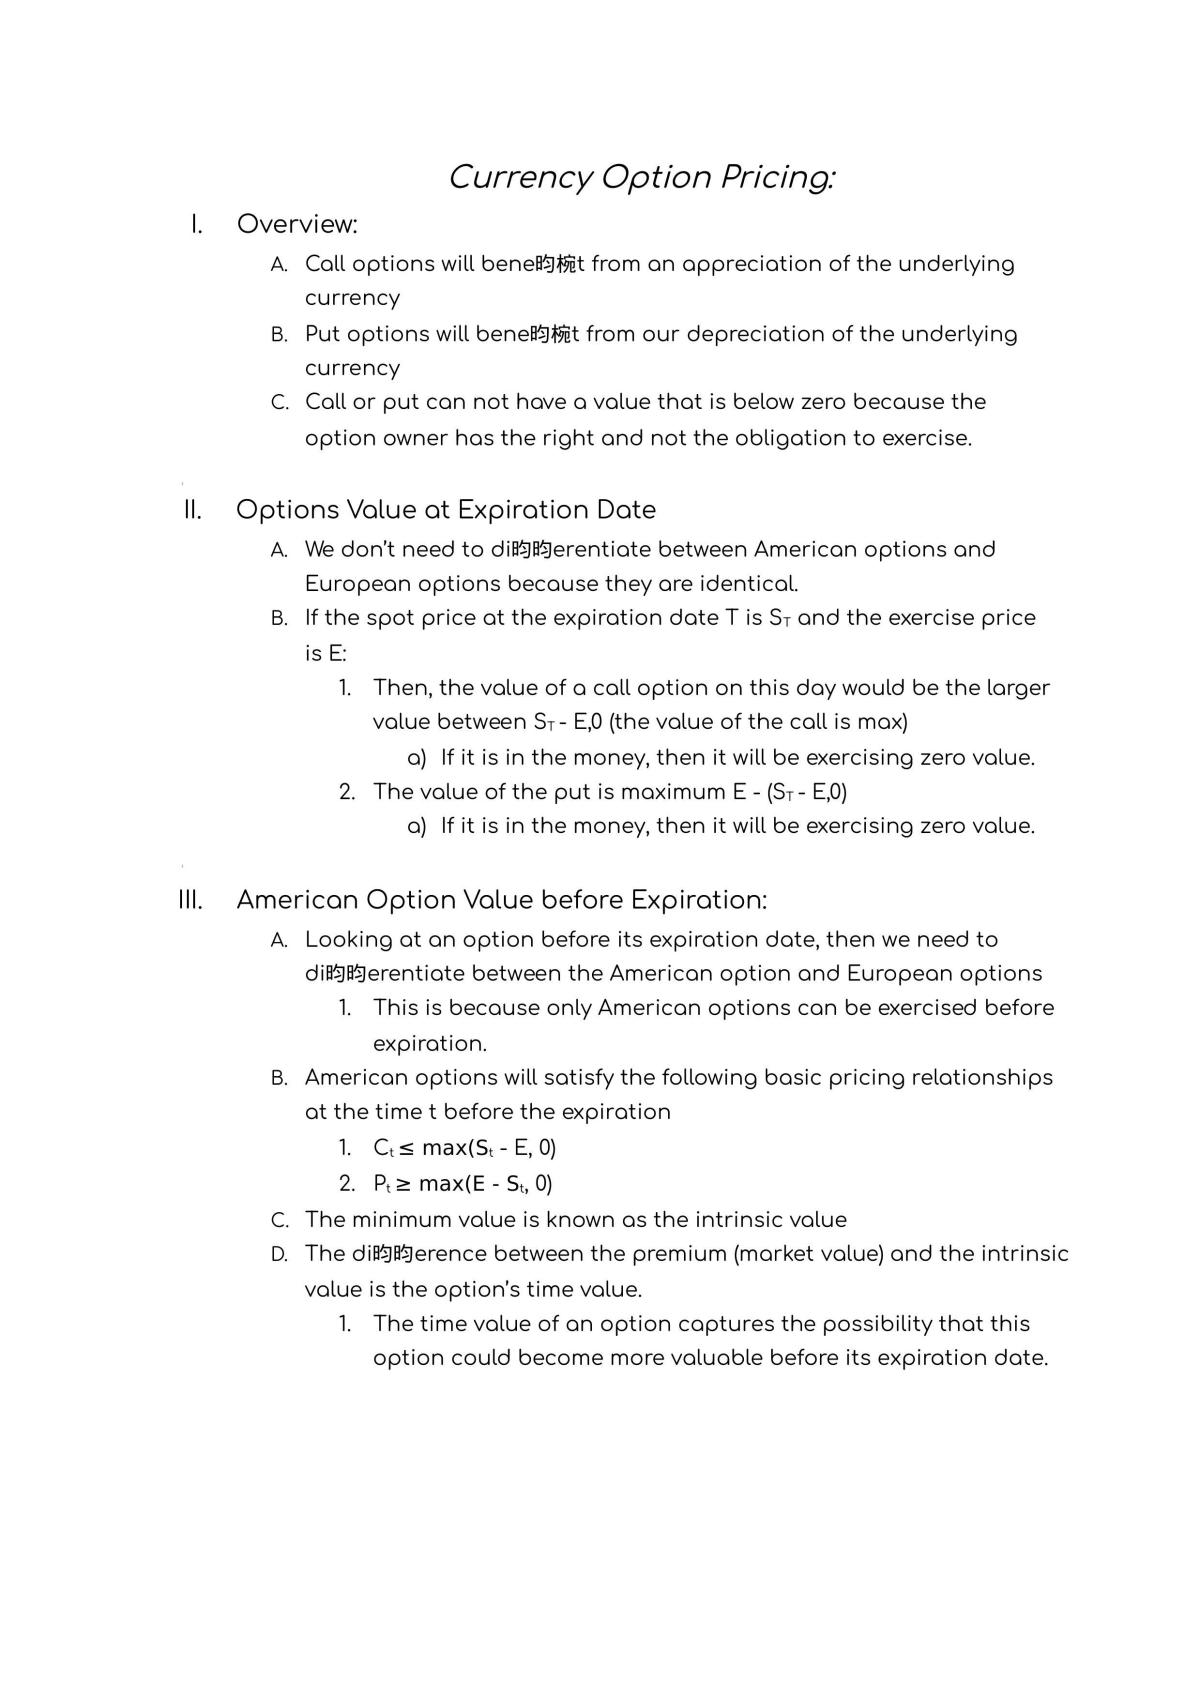 Lecture 9: Currency Option Pricing Notes - Page 1